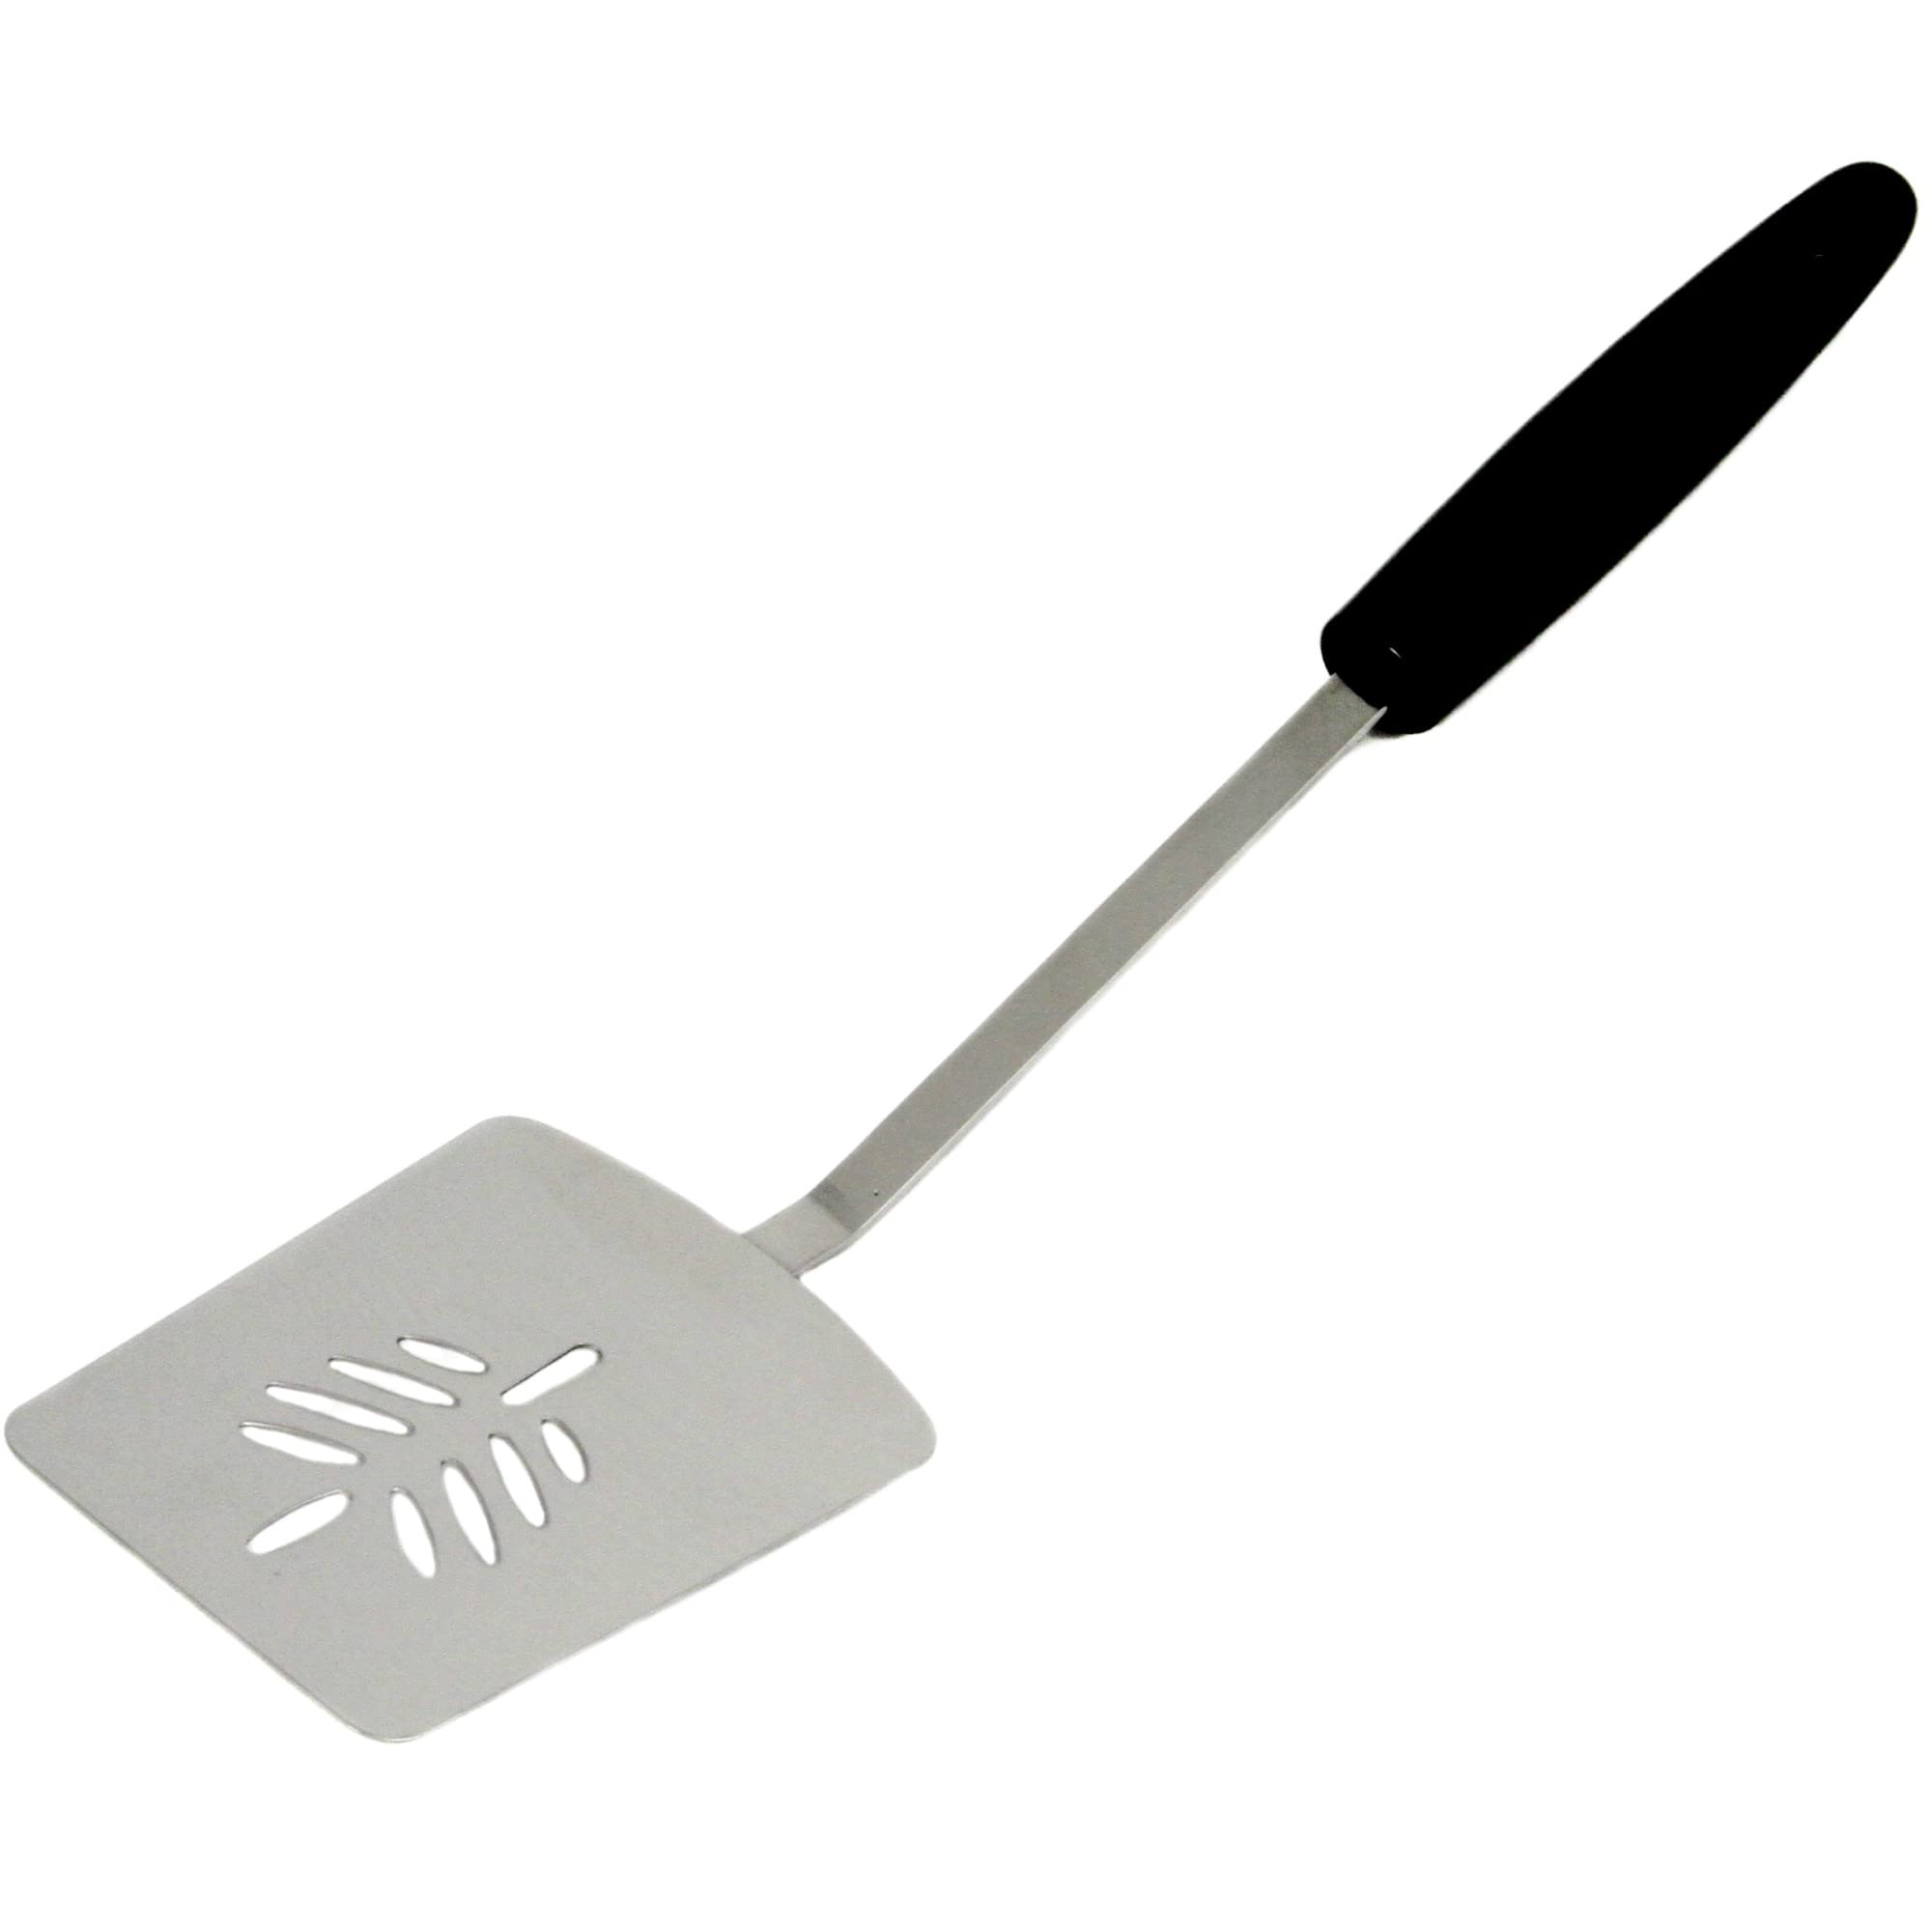 14" Chef Craft Stainless Steel Spatula $2.79 + Free Shipping w/ Prime or on orders over $35